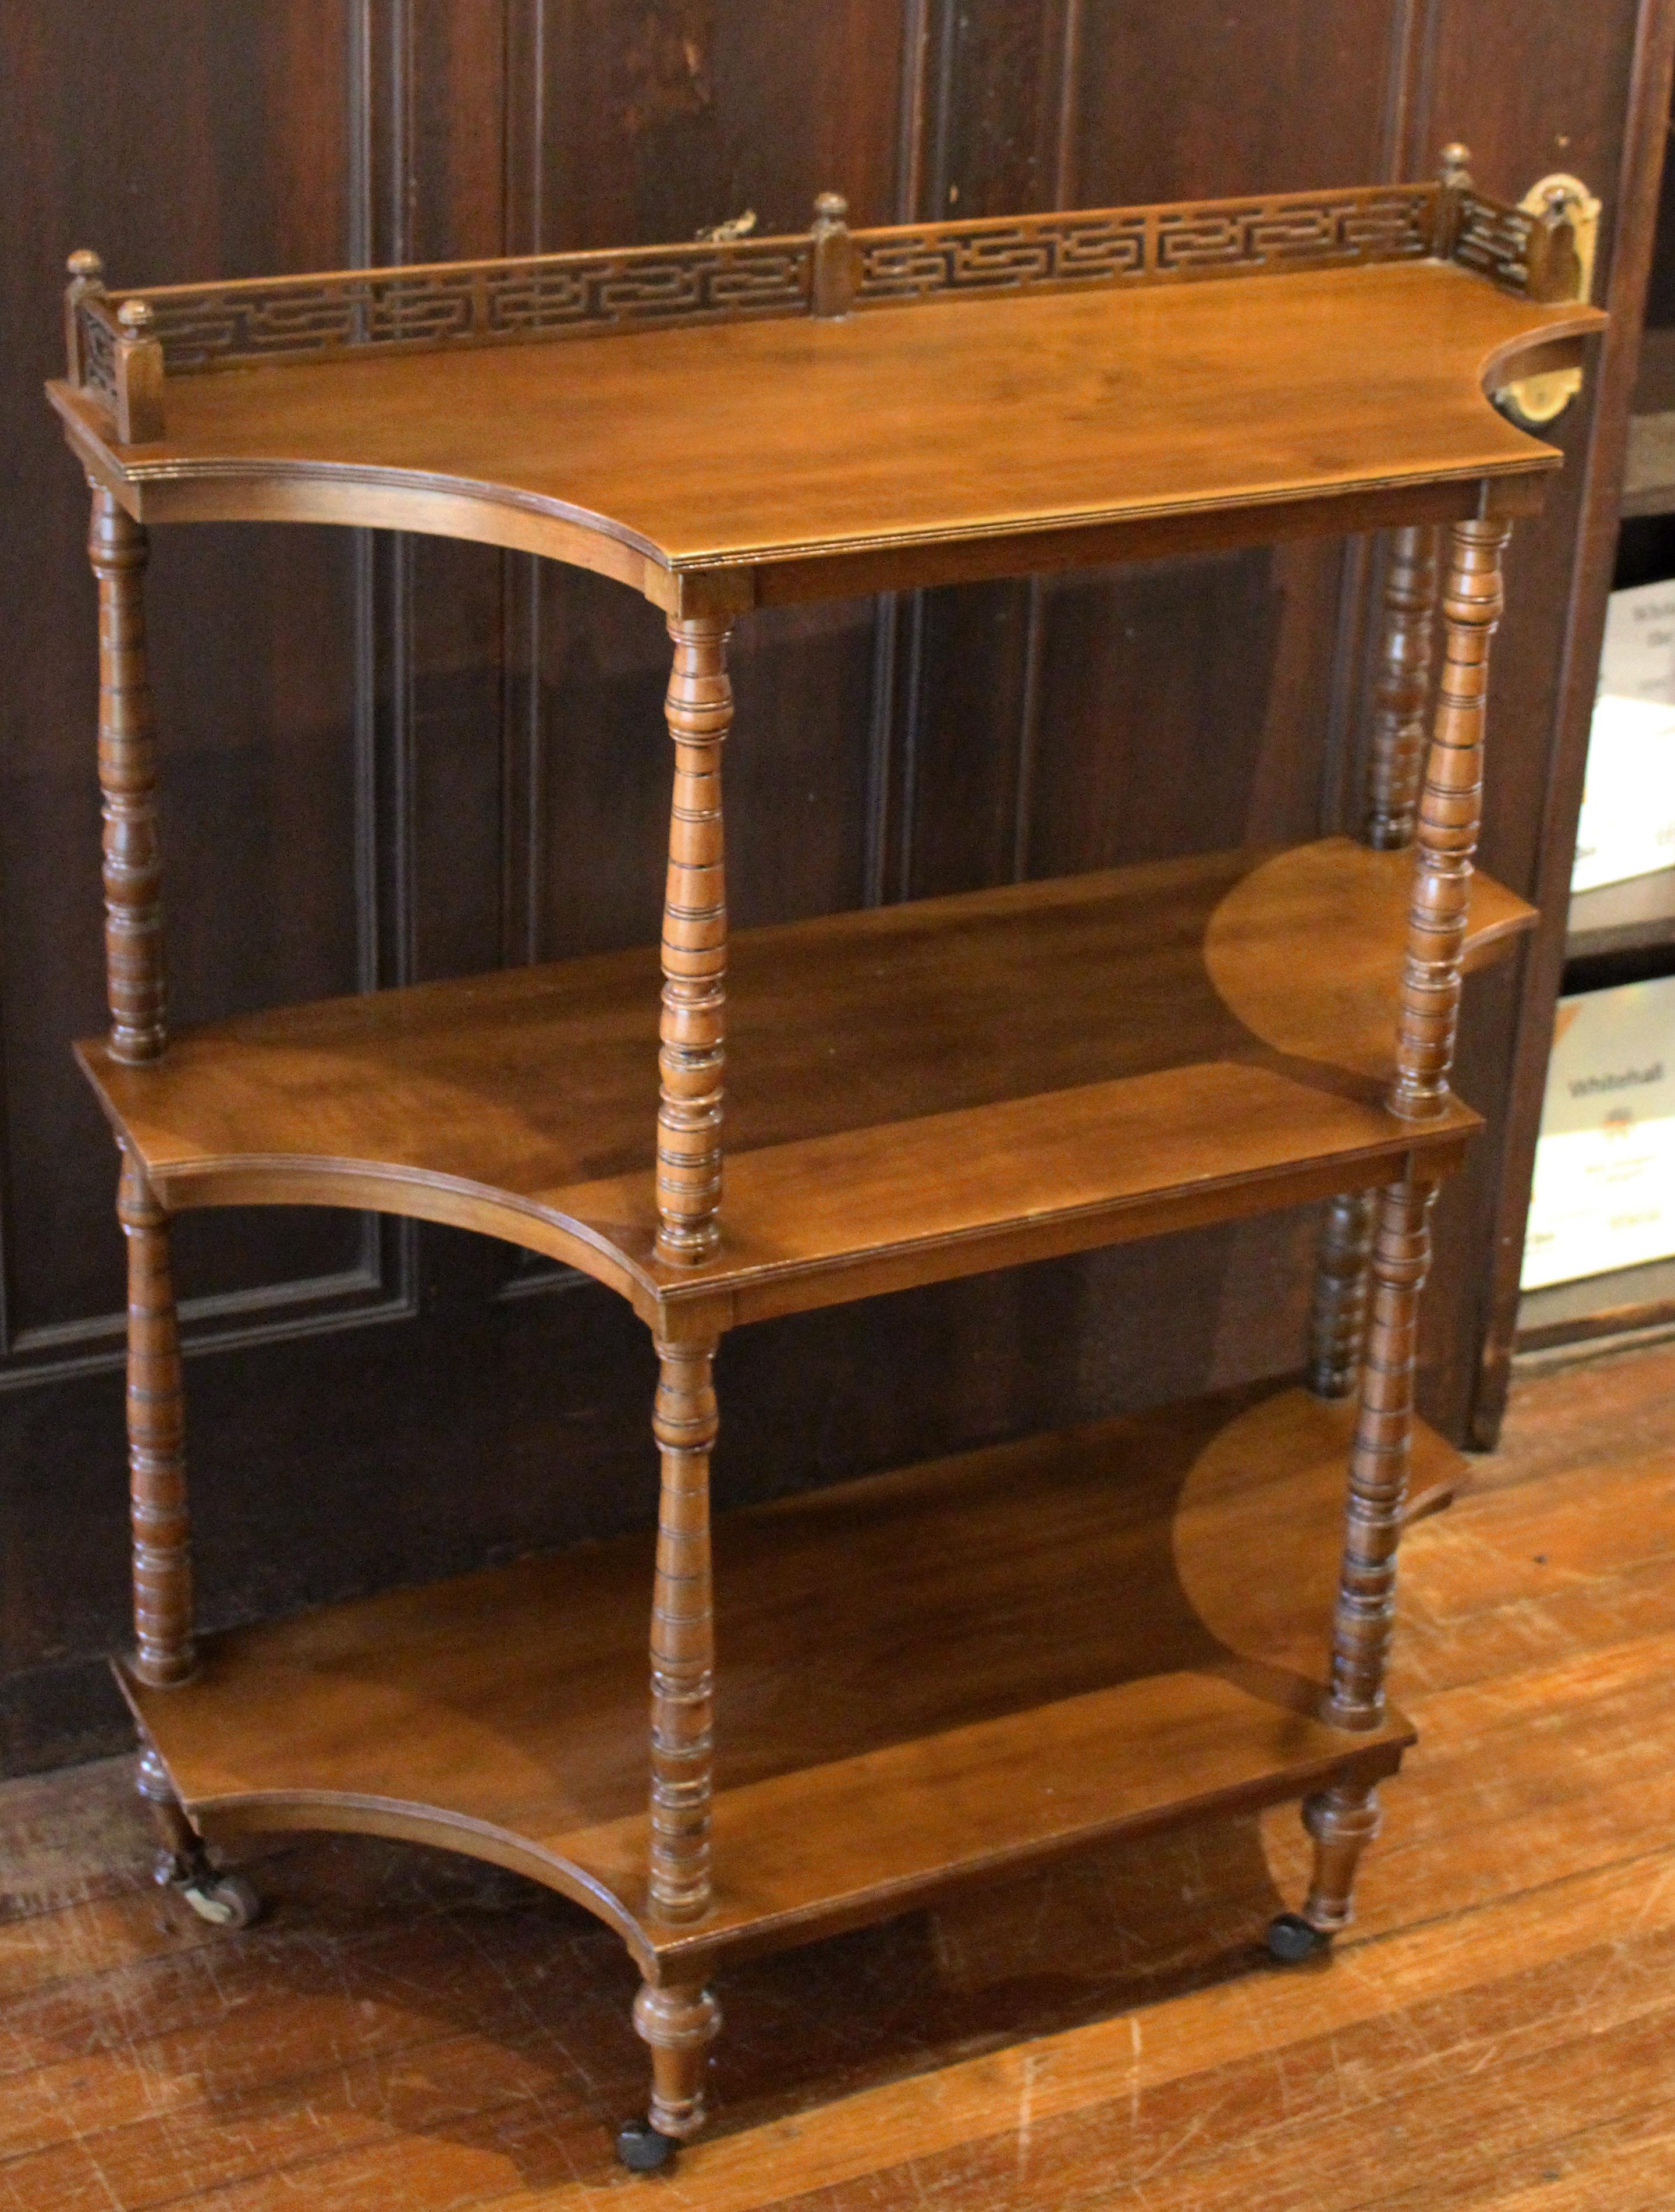 Late 19th century shaped 3-tier butler's buffet or etagere, mahogany, English. Concave sides ideal for a hall and many other spaces. Fret work top tier gallery with finials. Well-turned uprights with extensive incised and turned rings. Measures: 33